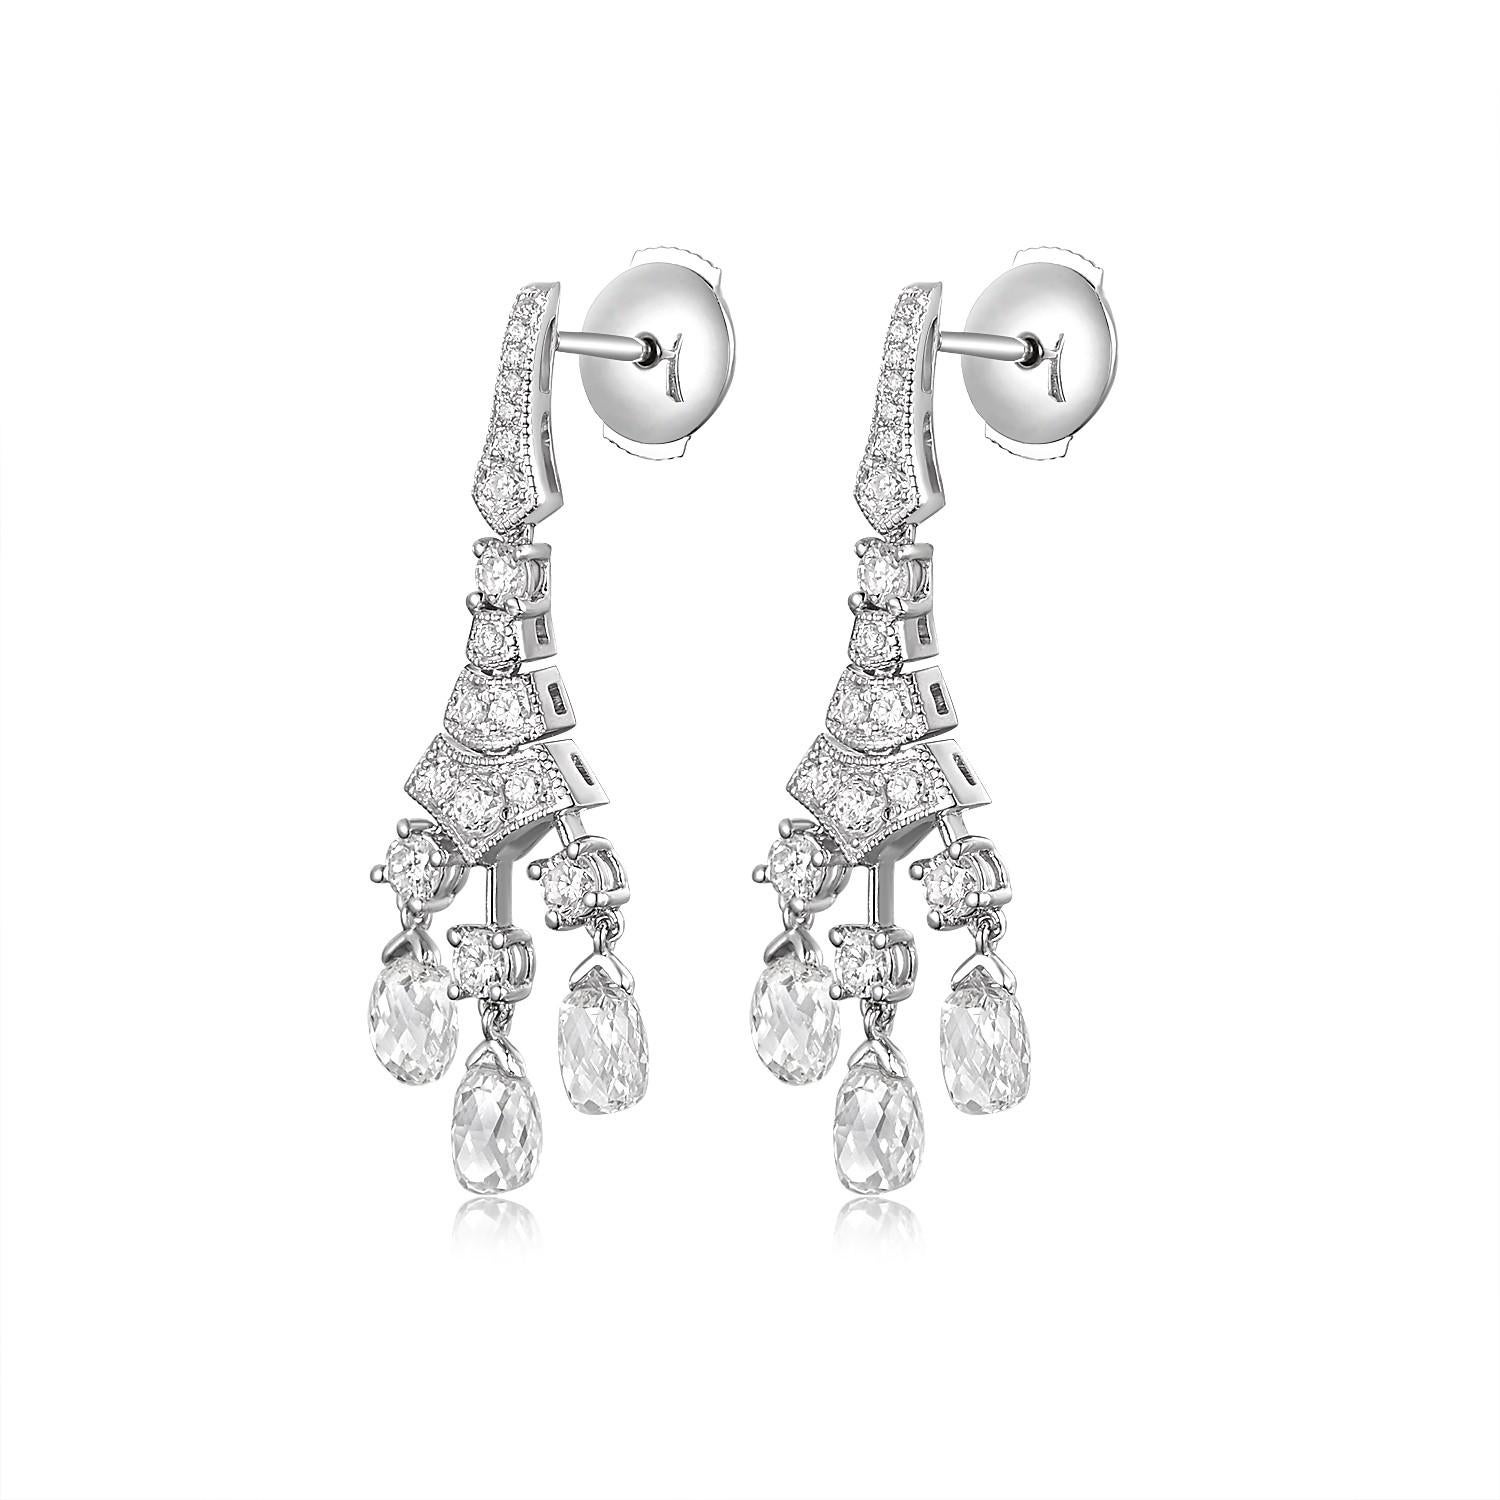 Step back in time with the elegance and allure of our antique briolette diamond dangle earrings. Delicately handcrafted in 18 karat white gold, these earrings exhibit a masterful blend of vintage design and modern craftsmanship.

Each earring